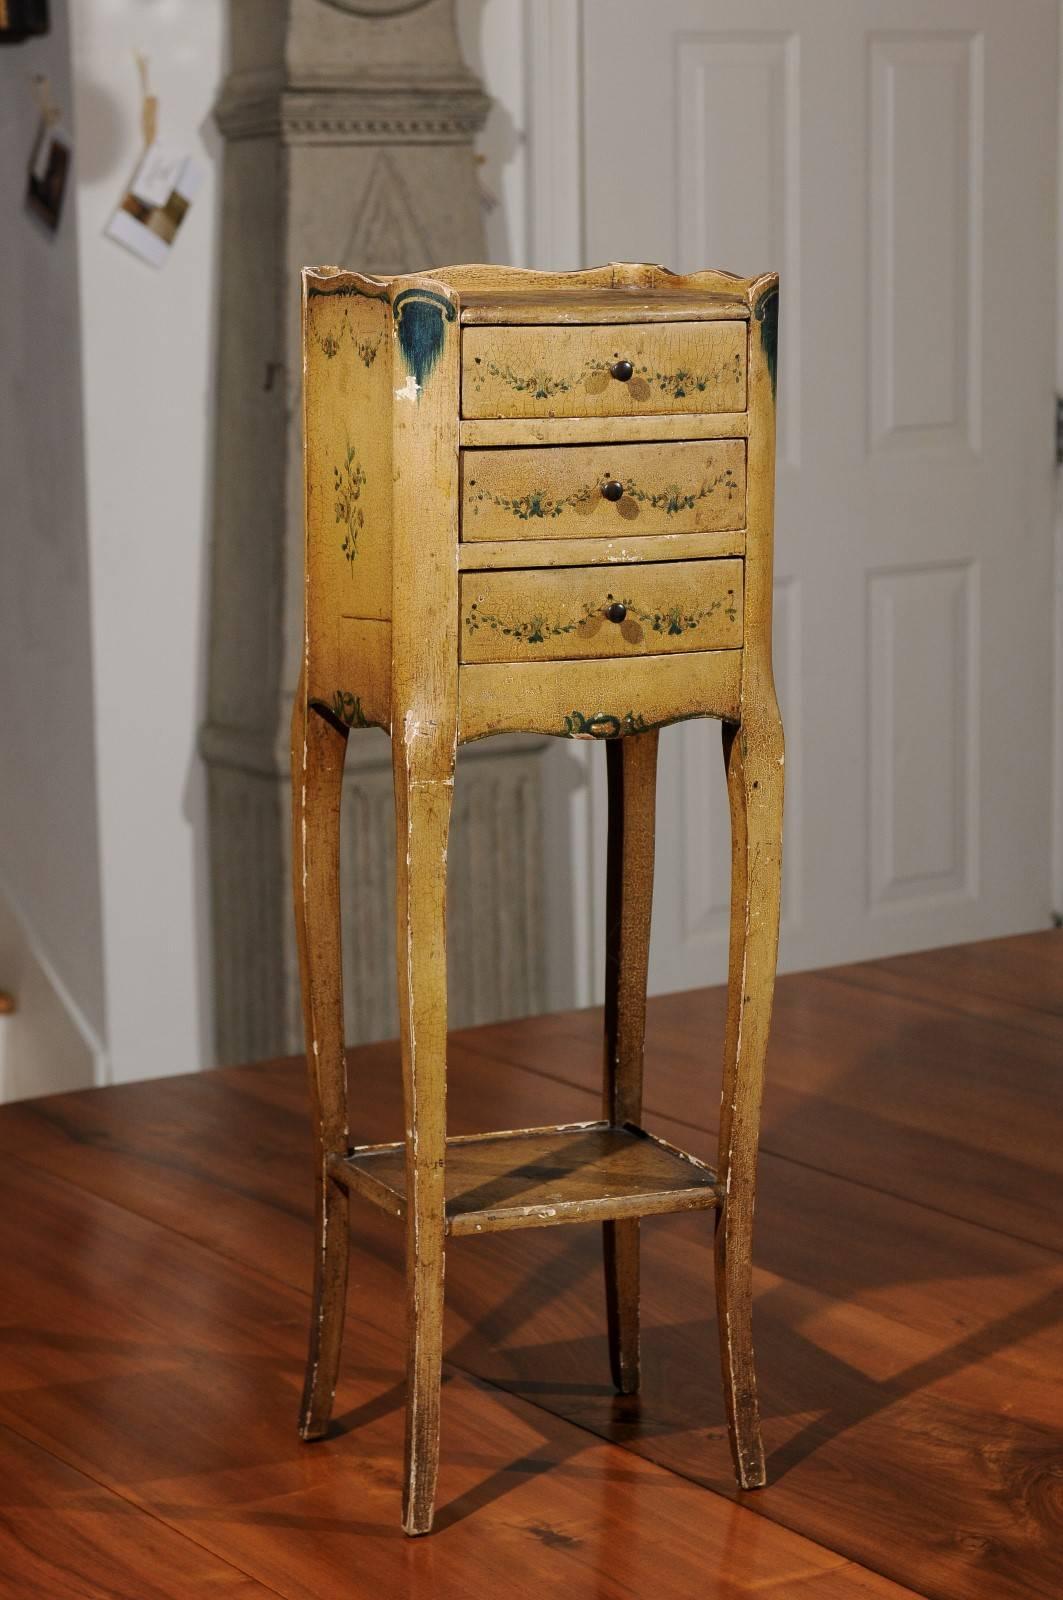 A 19th century Italian nightstand table with painted decor, three drawers and lower shelf. This Italian nightstand table features a rectangular top adorned with a charming painted scene, surrounded with a wooden three-quarter gallery. Three